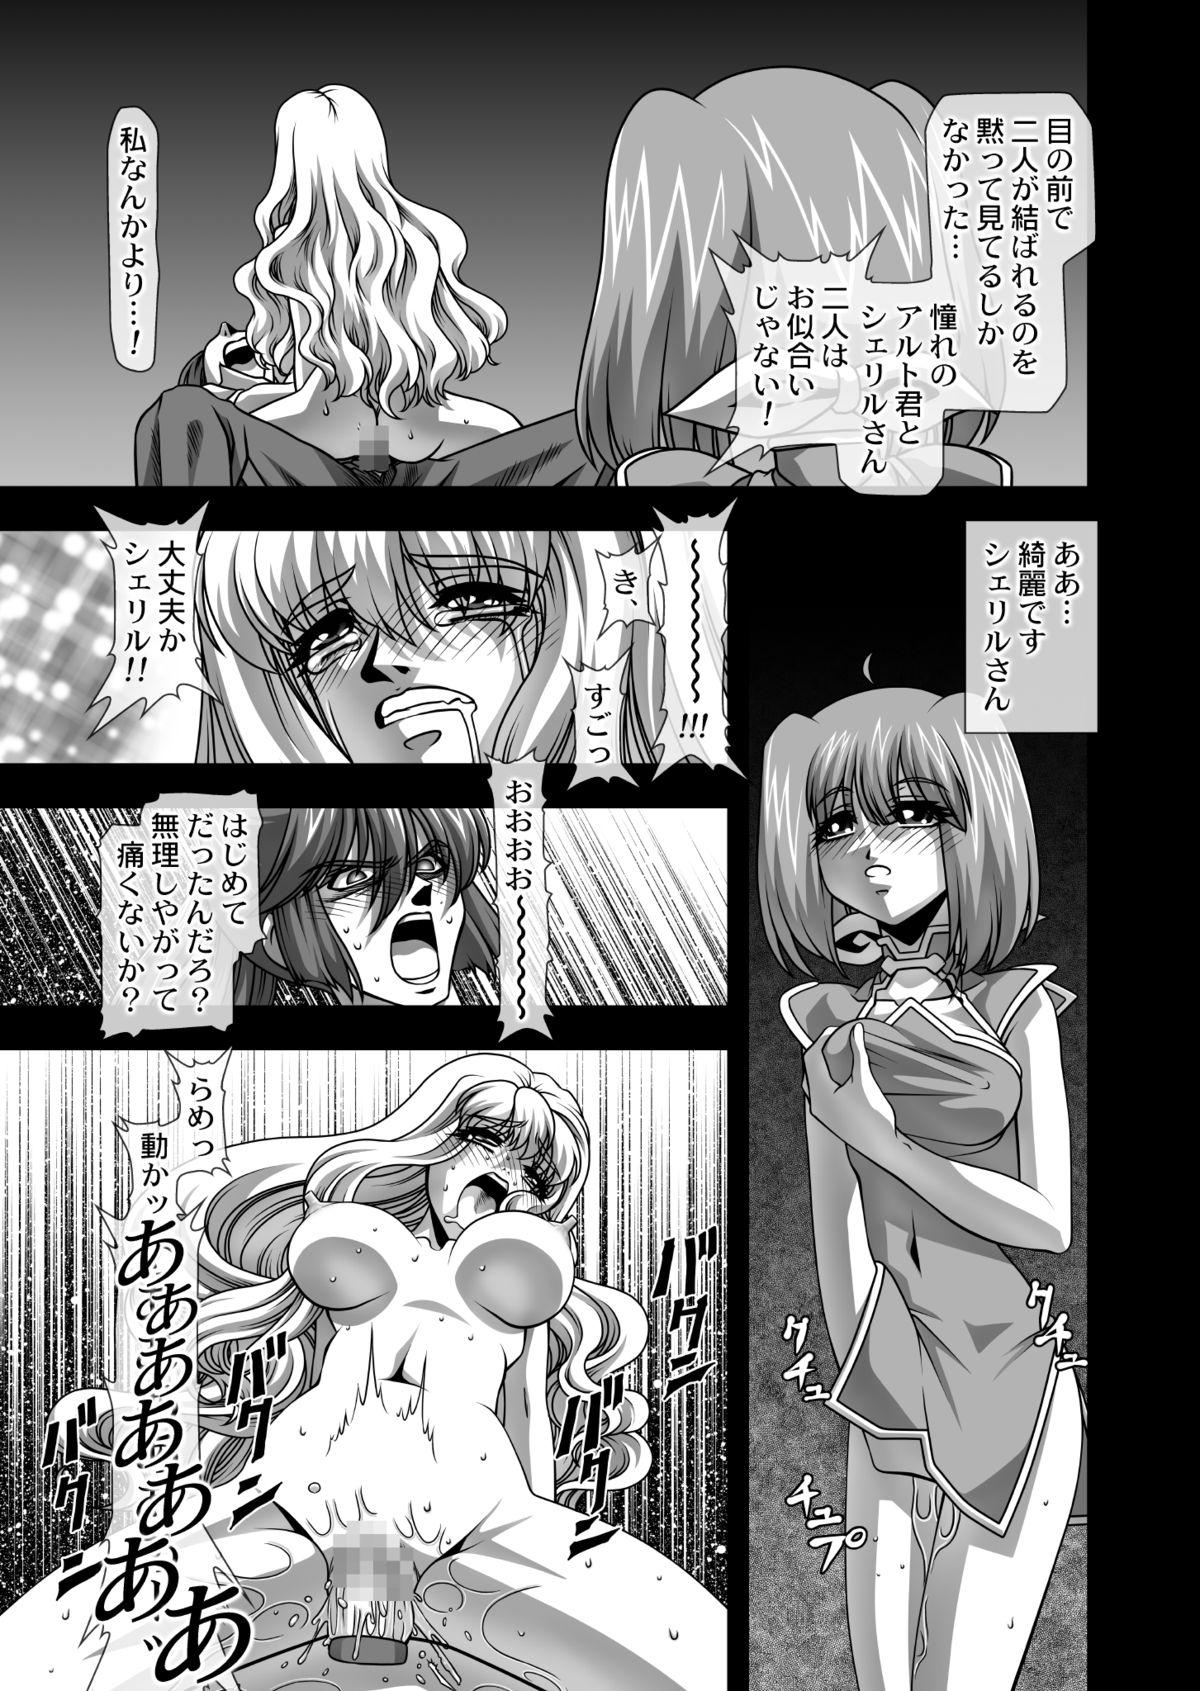 Lover Oppai Meister!! - Macross frontier Hole - Page 10